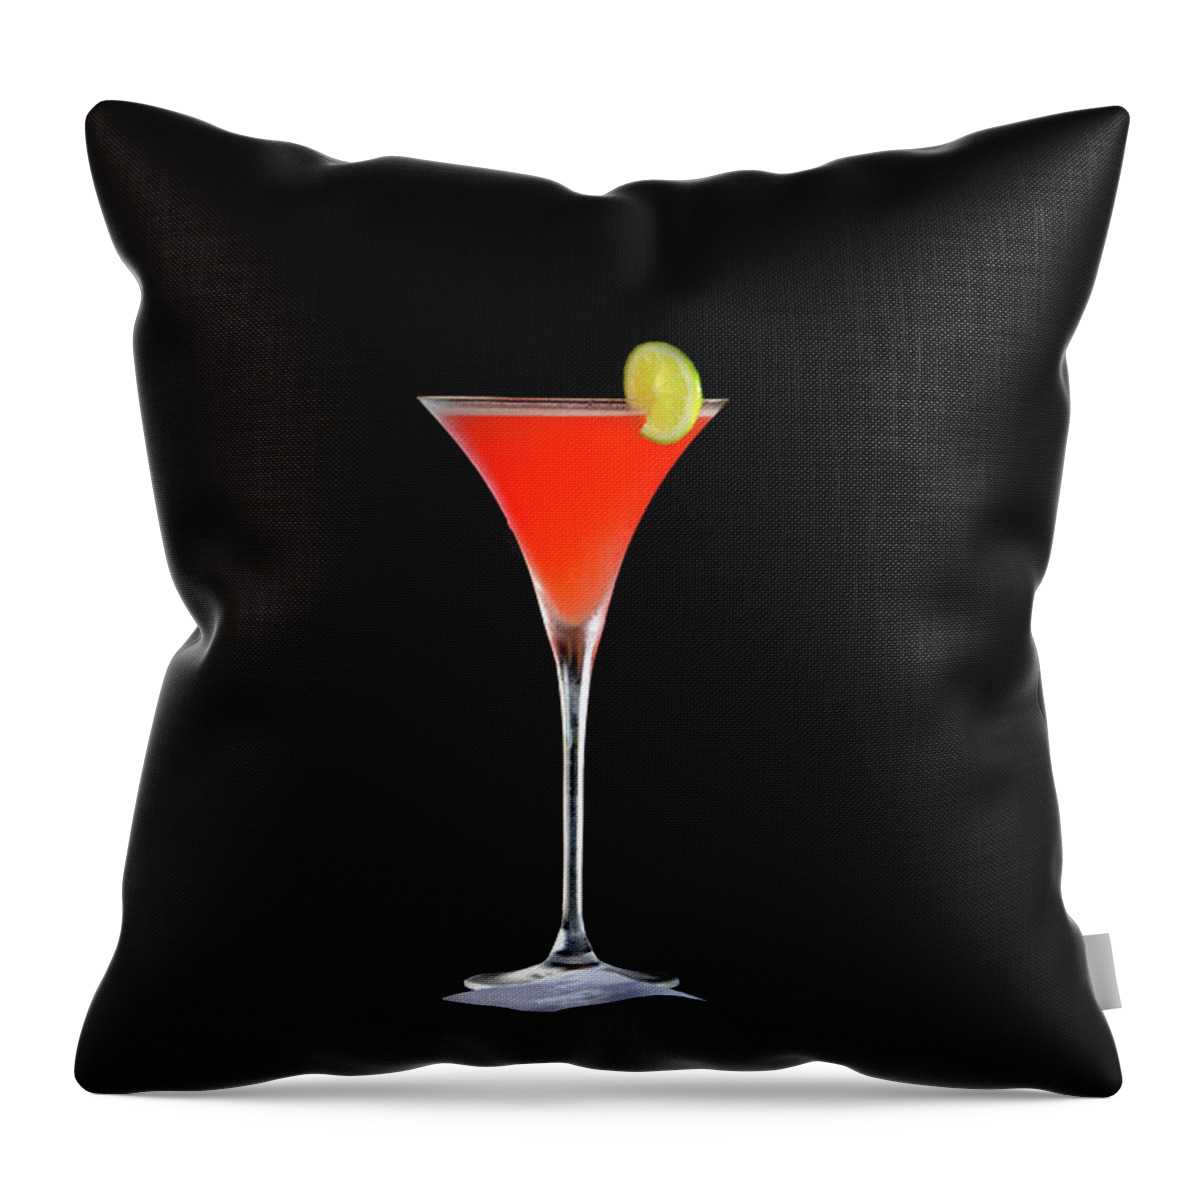 The Perfect Drink Throw Pillow featuring the photograph The Perfect Drink by David Lee Thompson